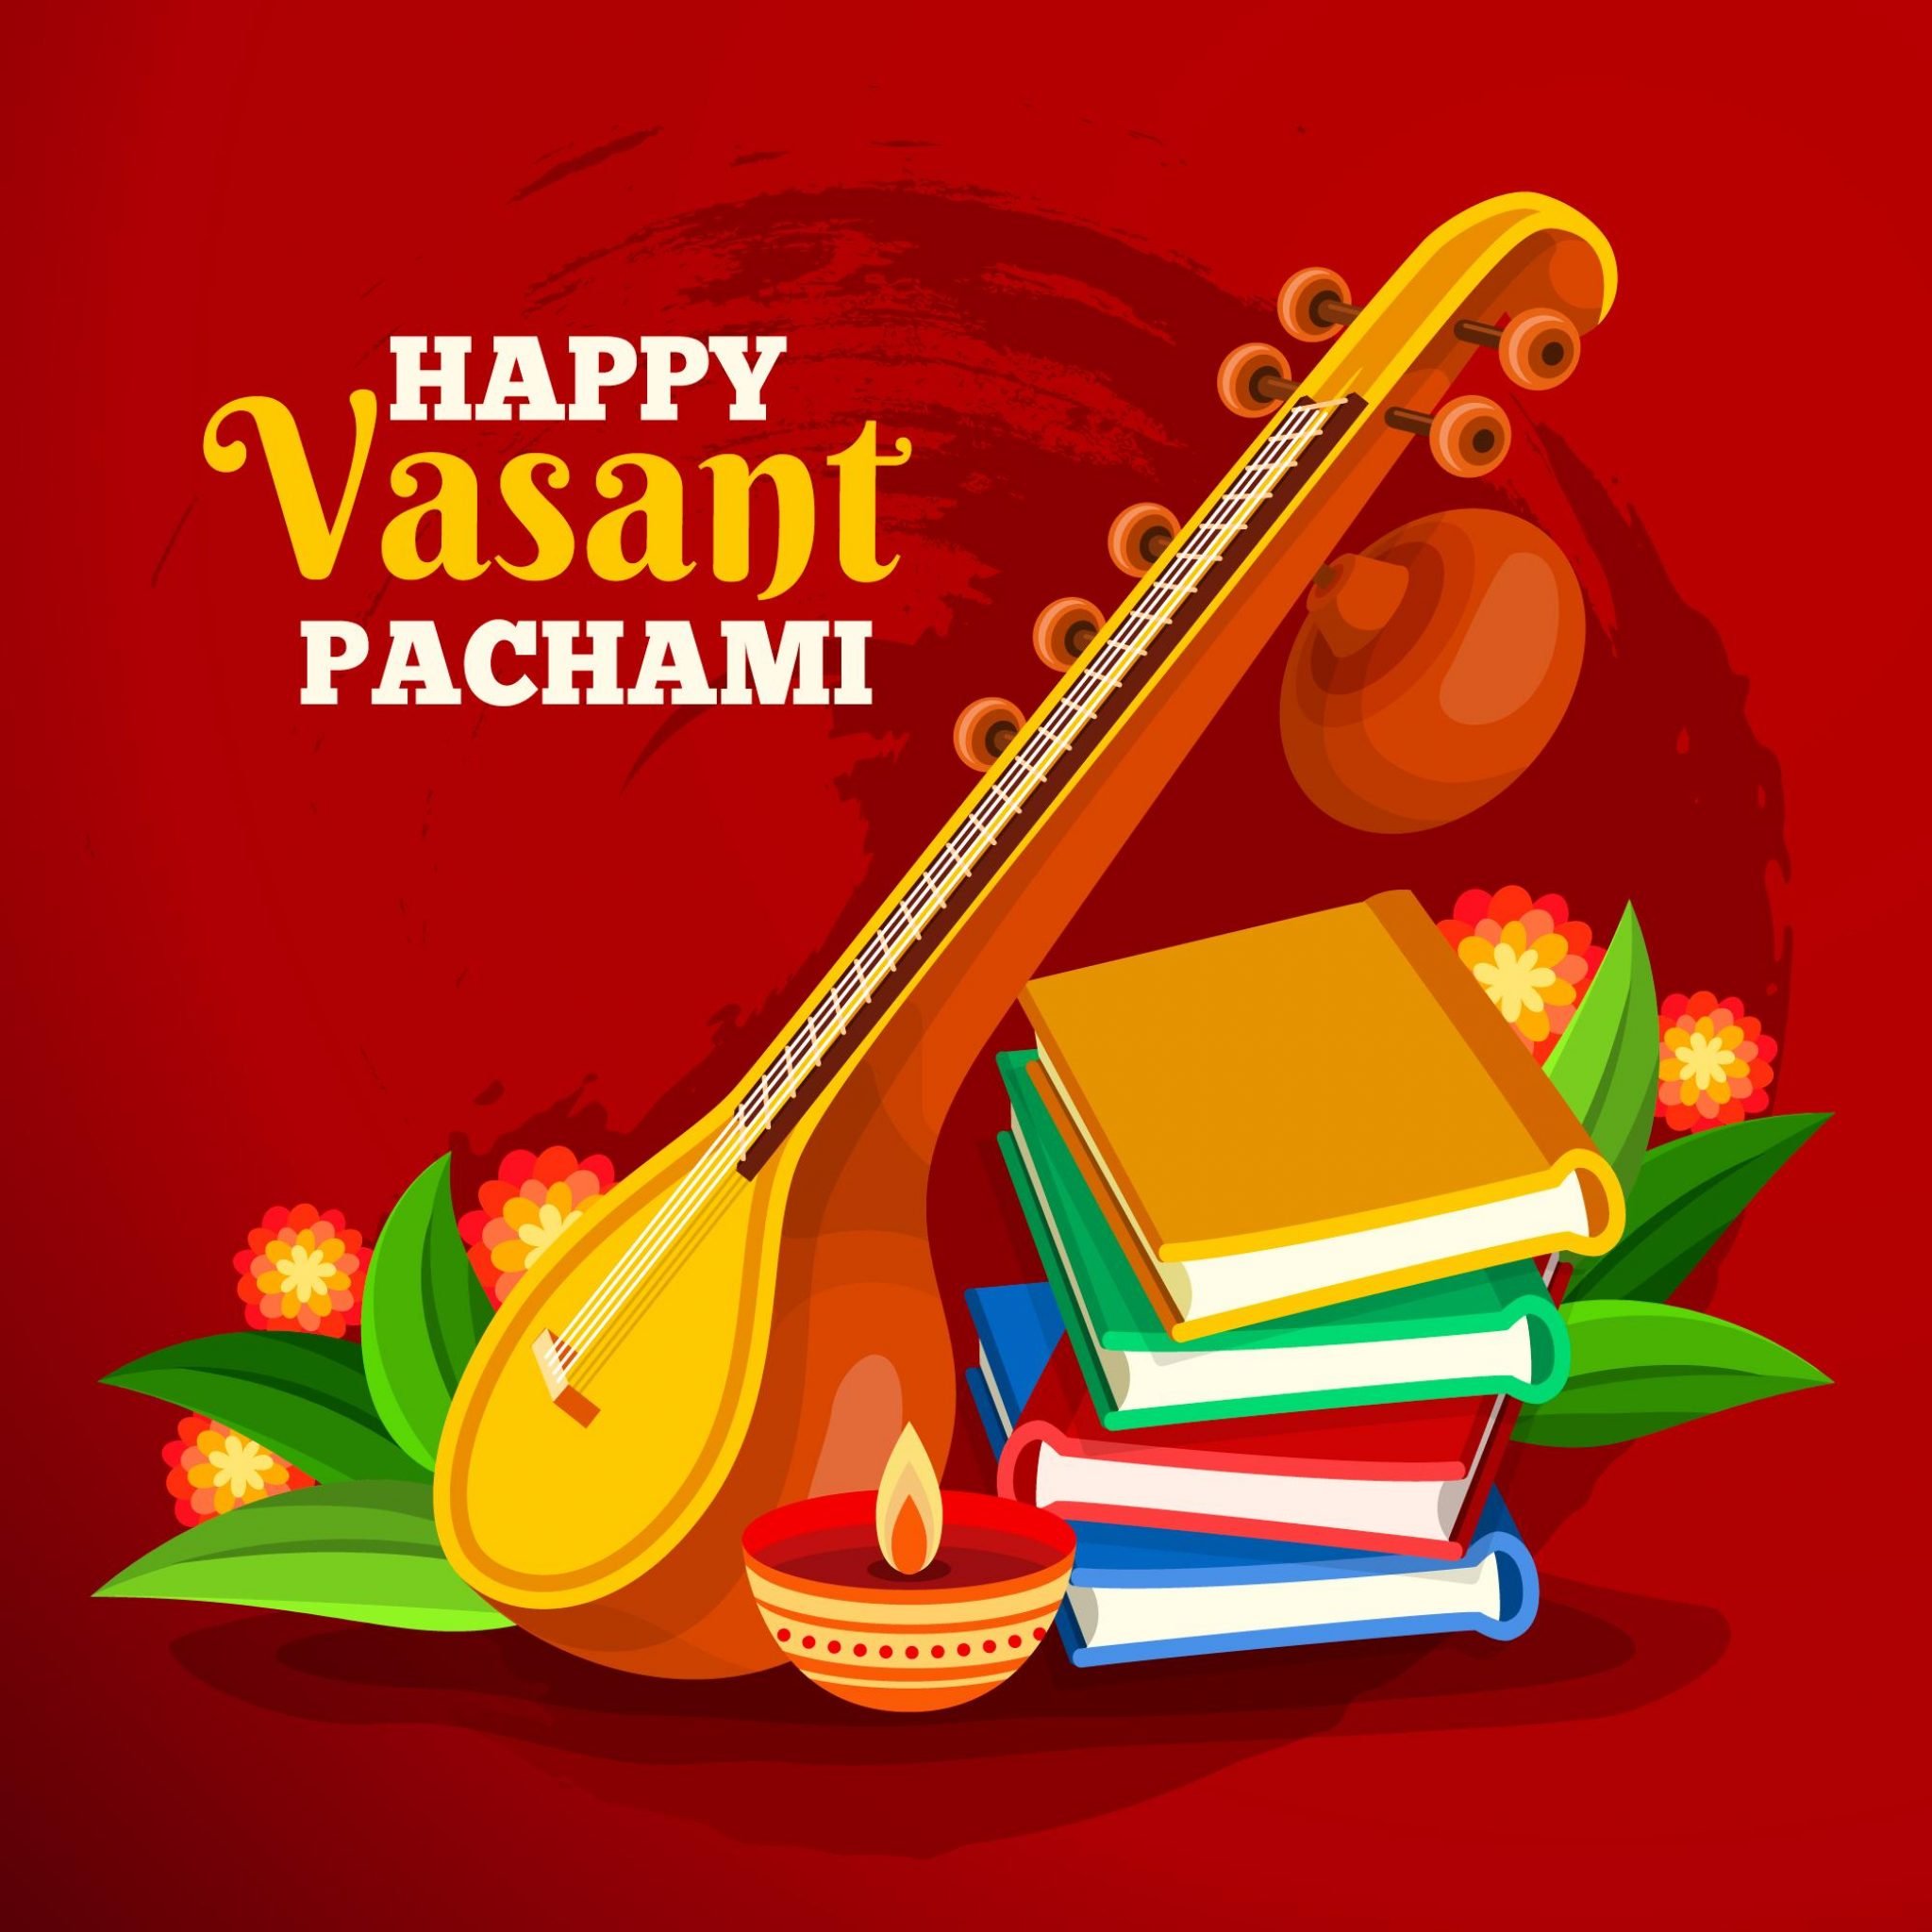 Happy Vasant Panchami 2023 Wishes, Greetings, Quotes and Messages